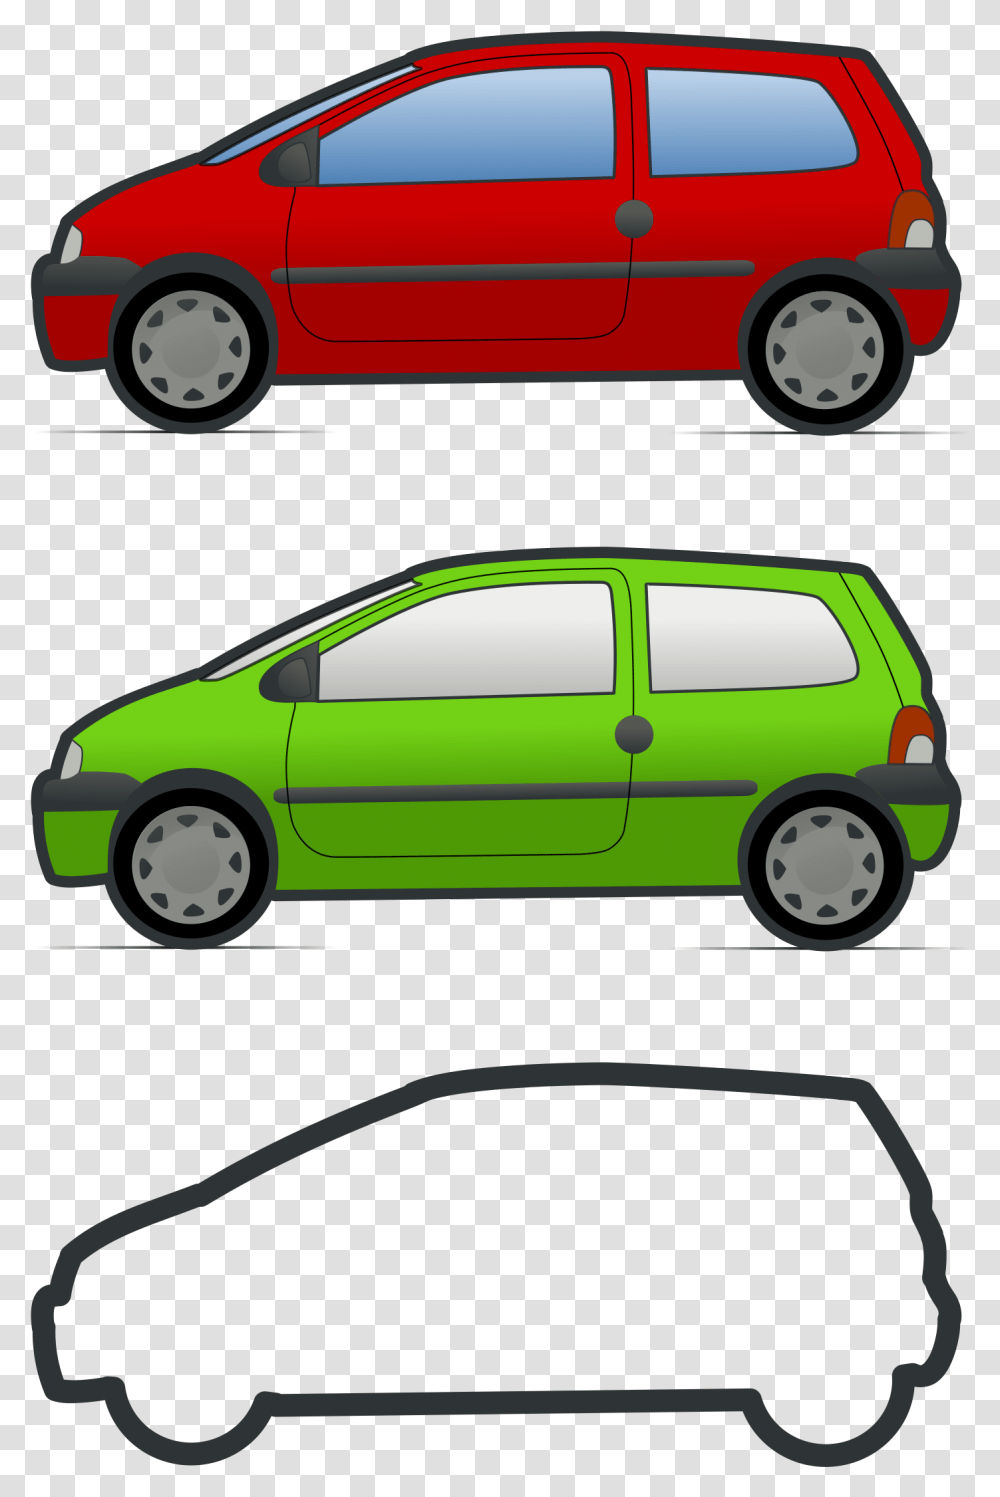 Red And Green Car Icon Clipart Car Clipart Small, Vehicle, Transportation, Wheel, Machine Transparent Png